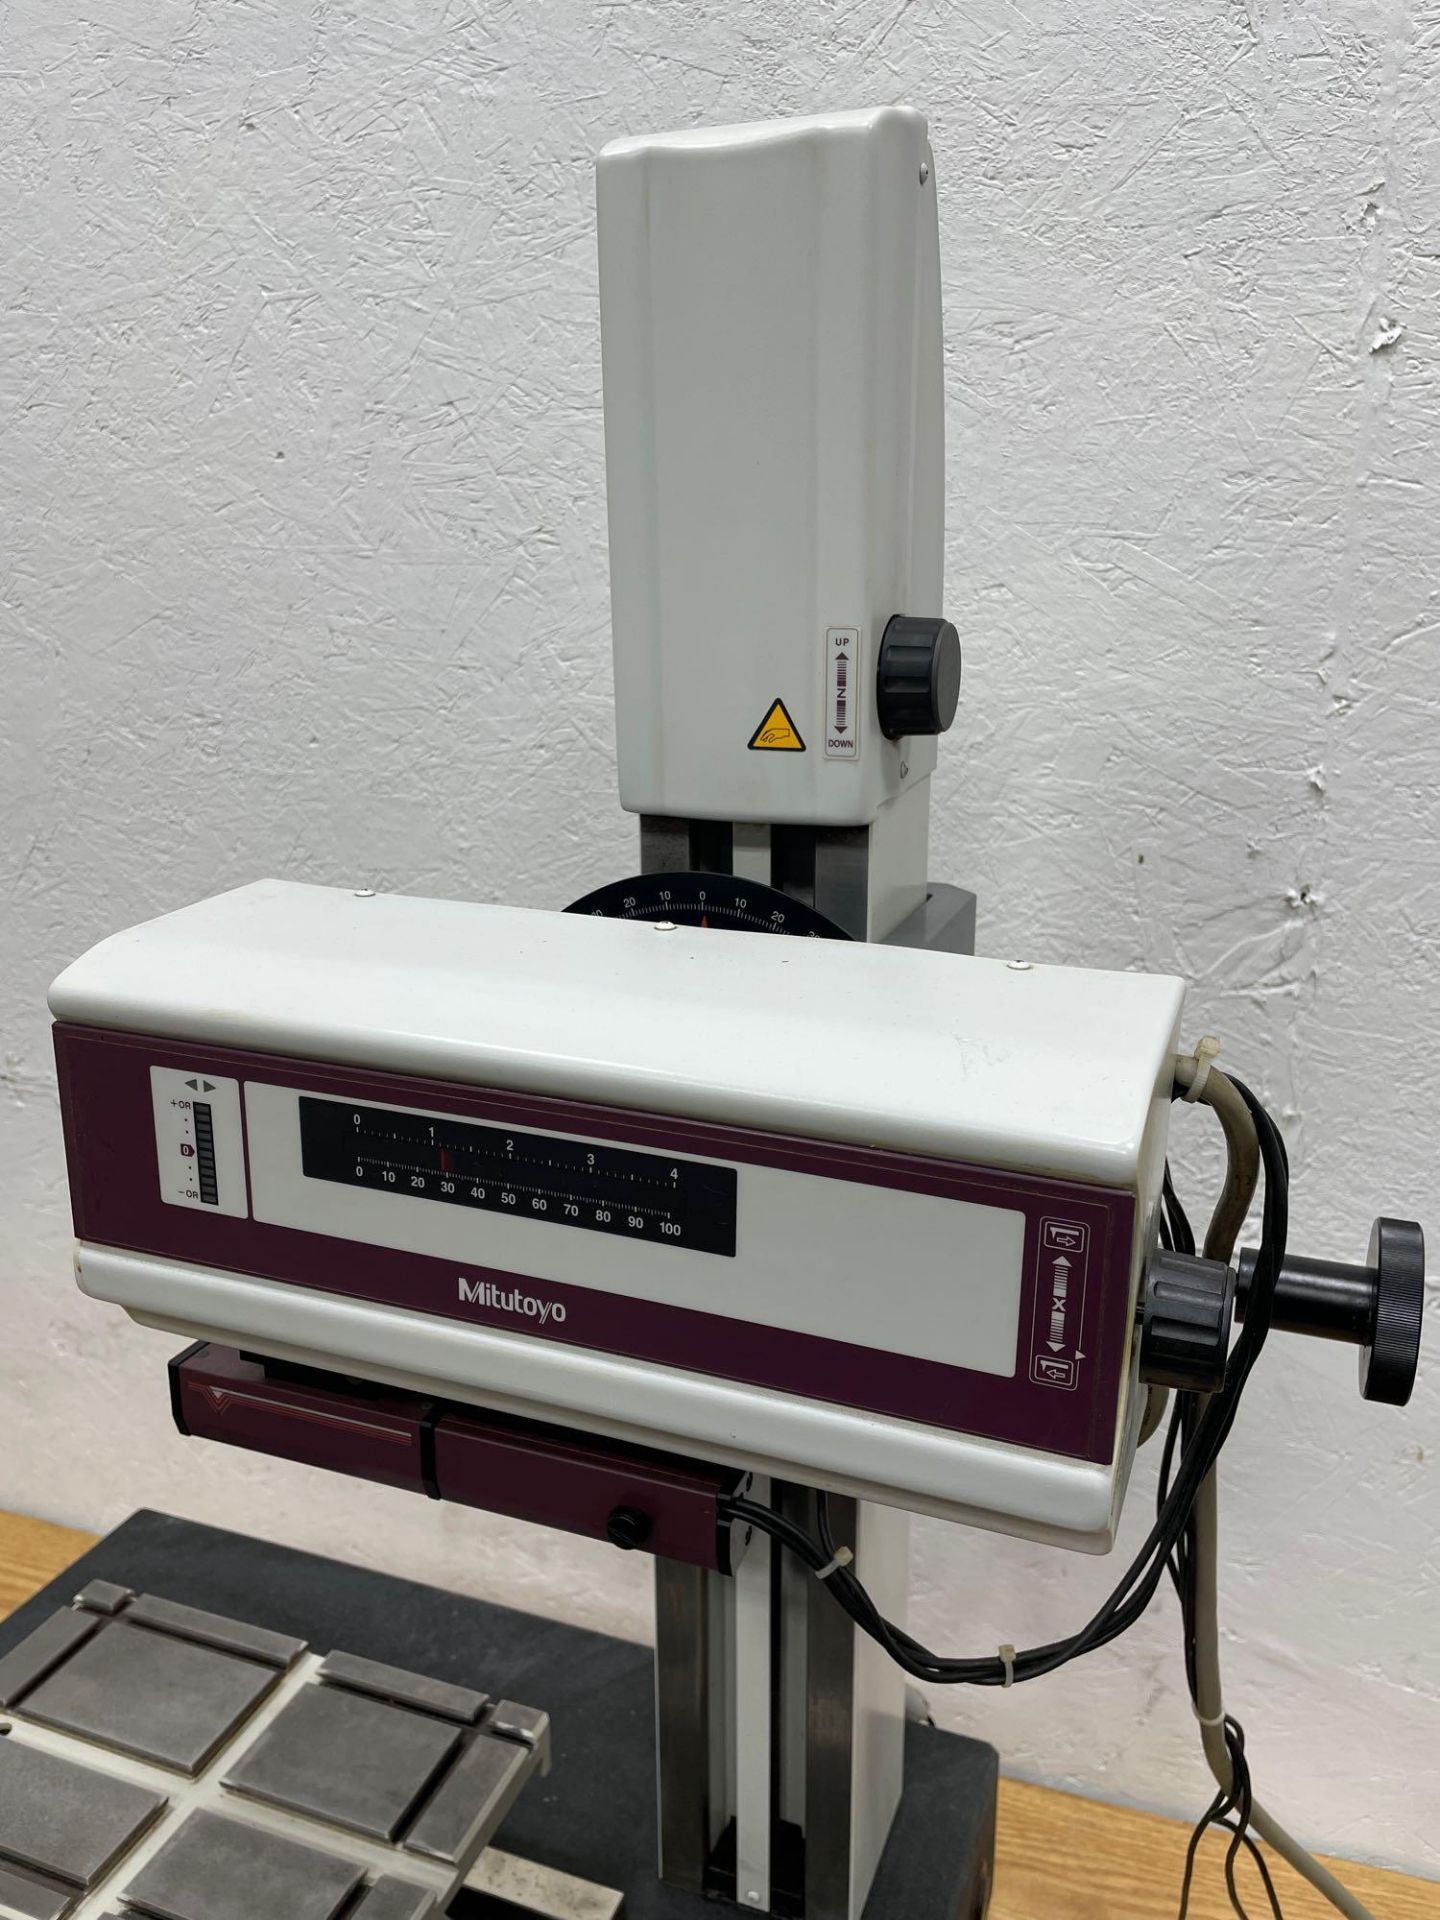 MITUTOYO CS-3000 FORMTRACER Contour & Surface Roughness System Profilometer - Image 8 of 20